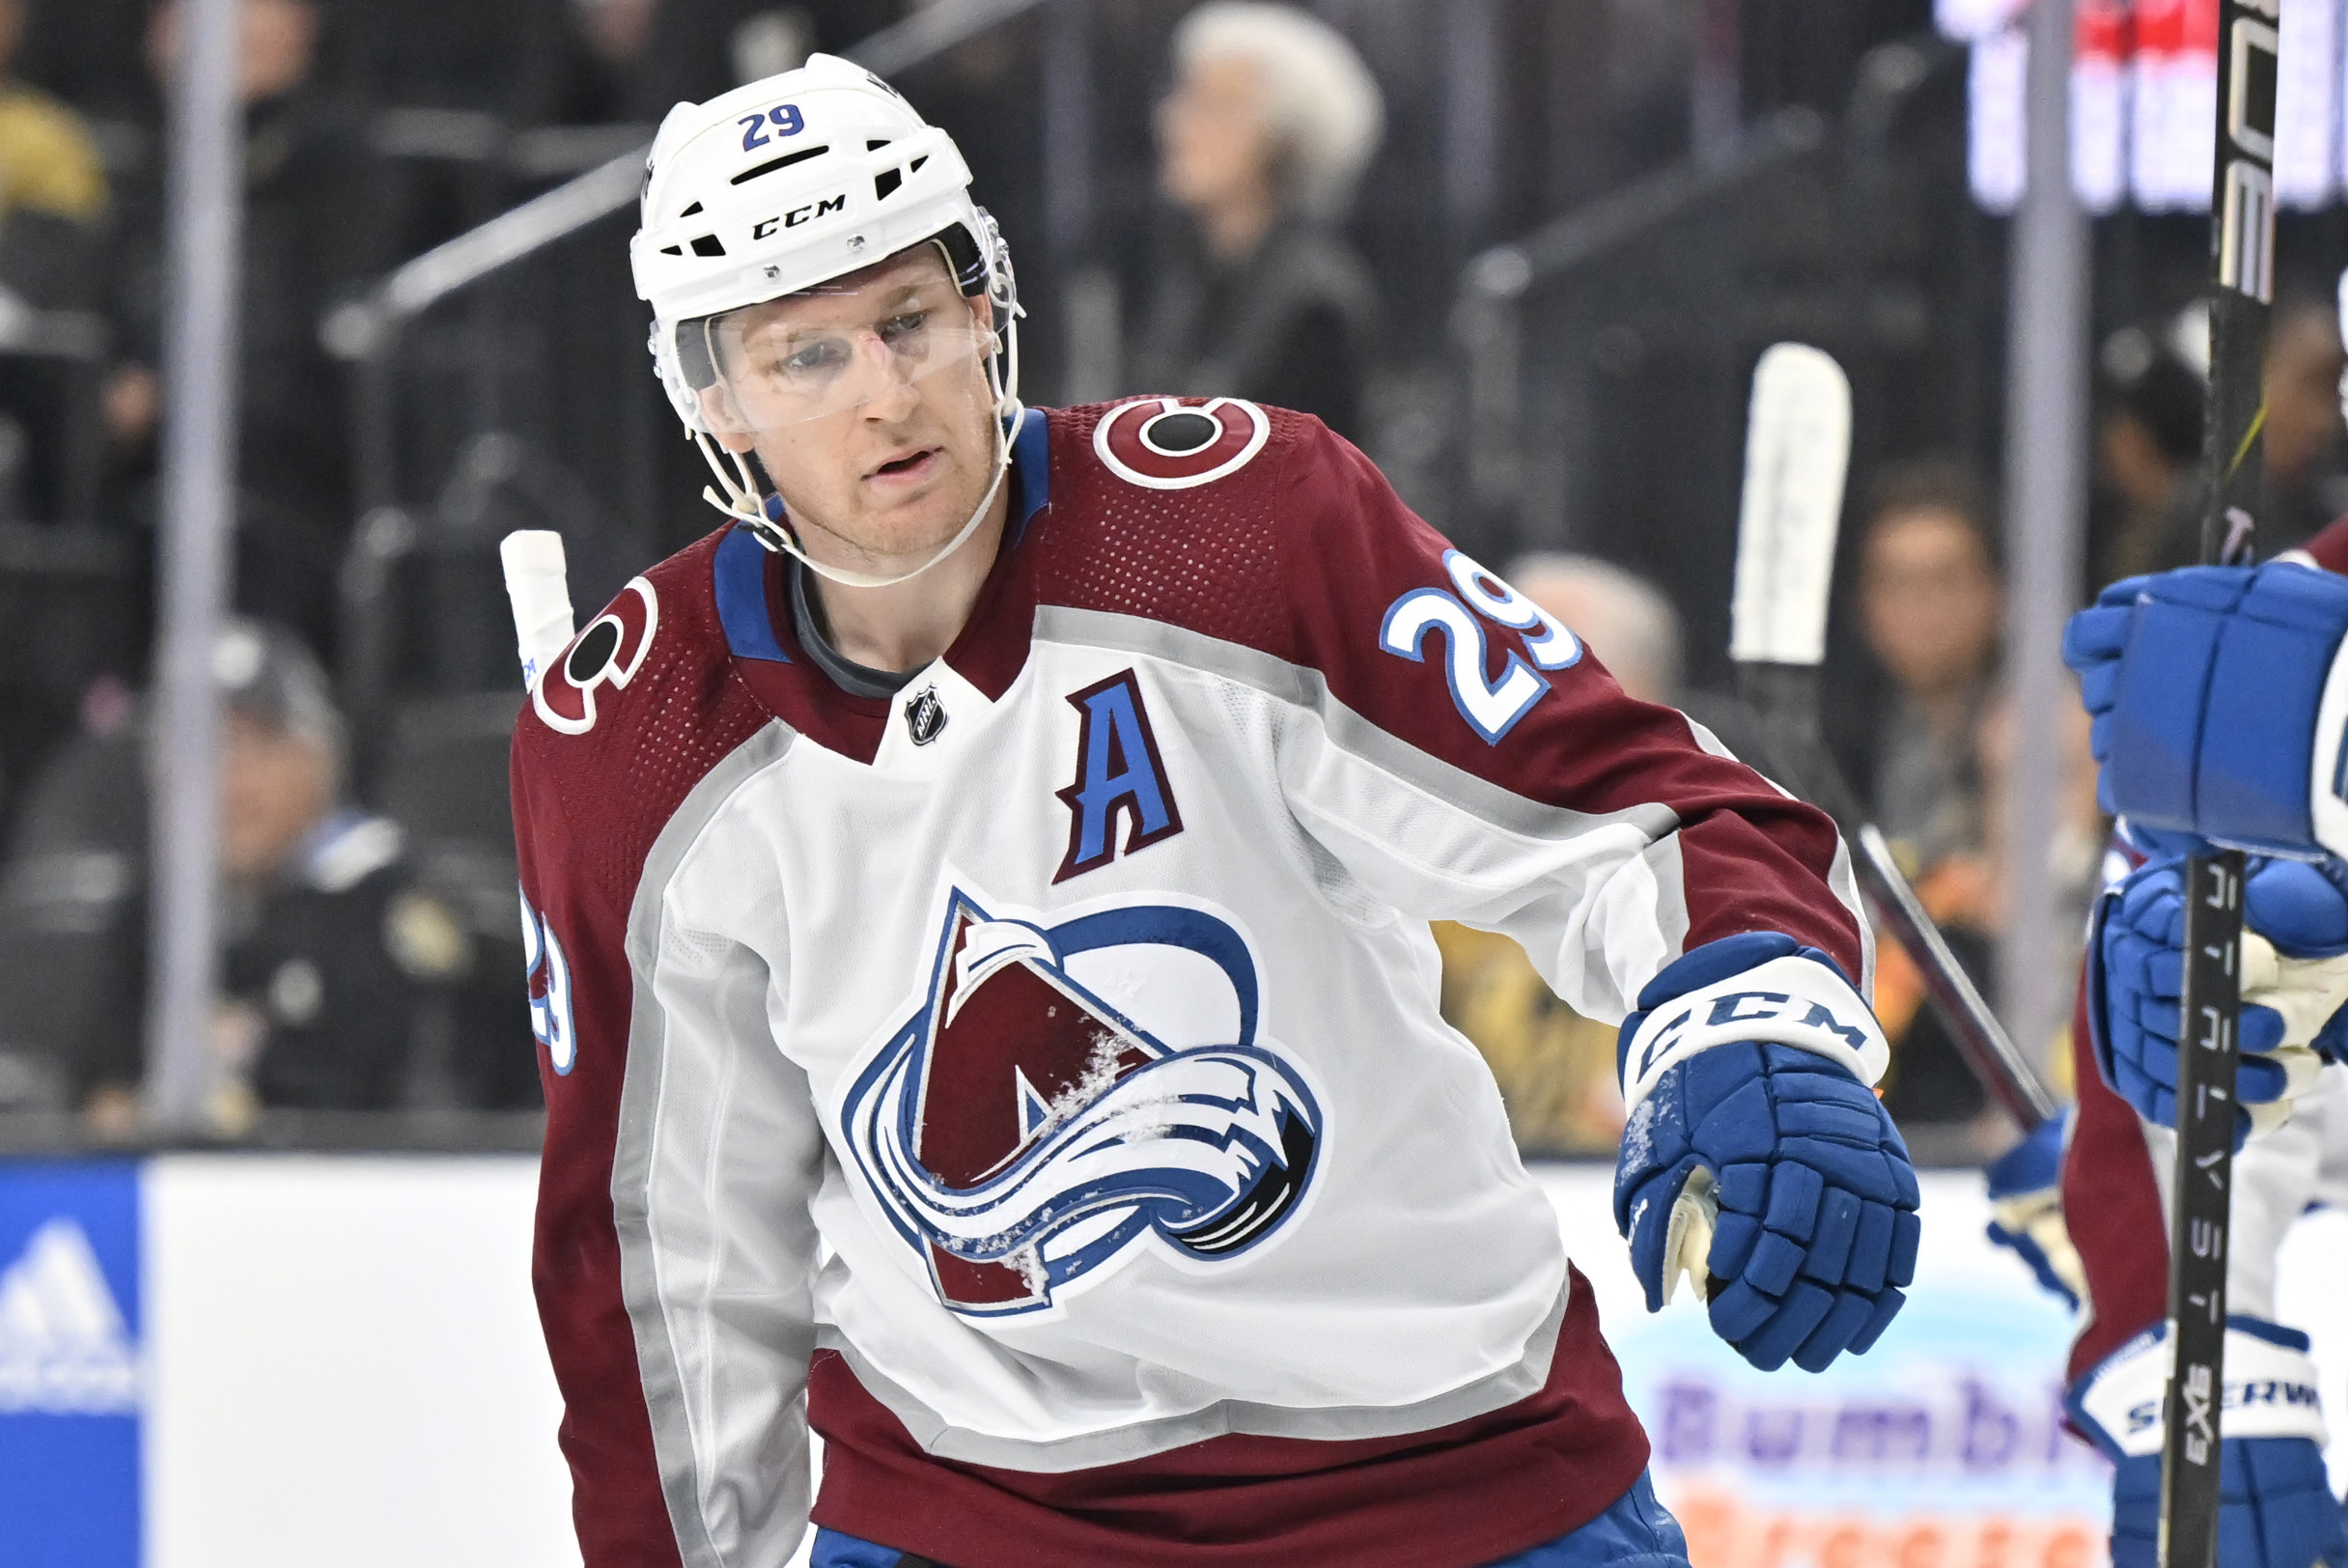 Landeskog's career isn't done, but admits injury could linger as